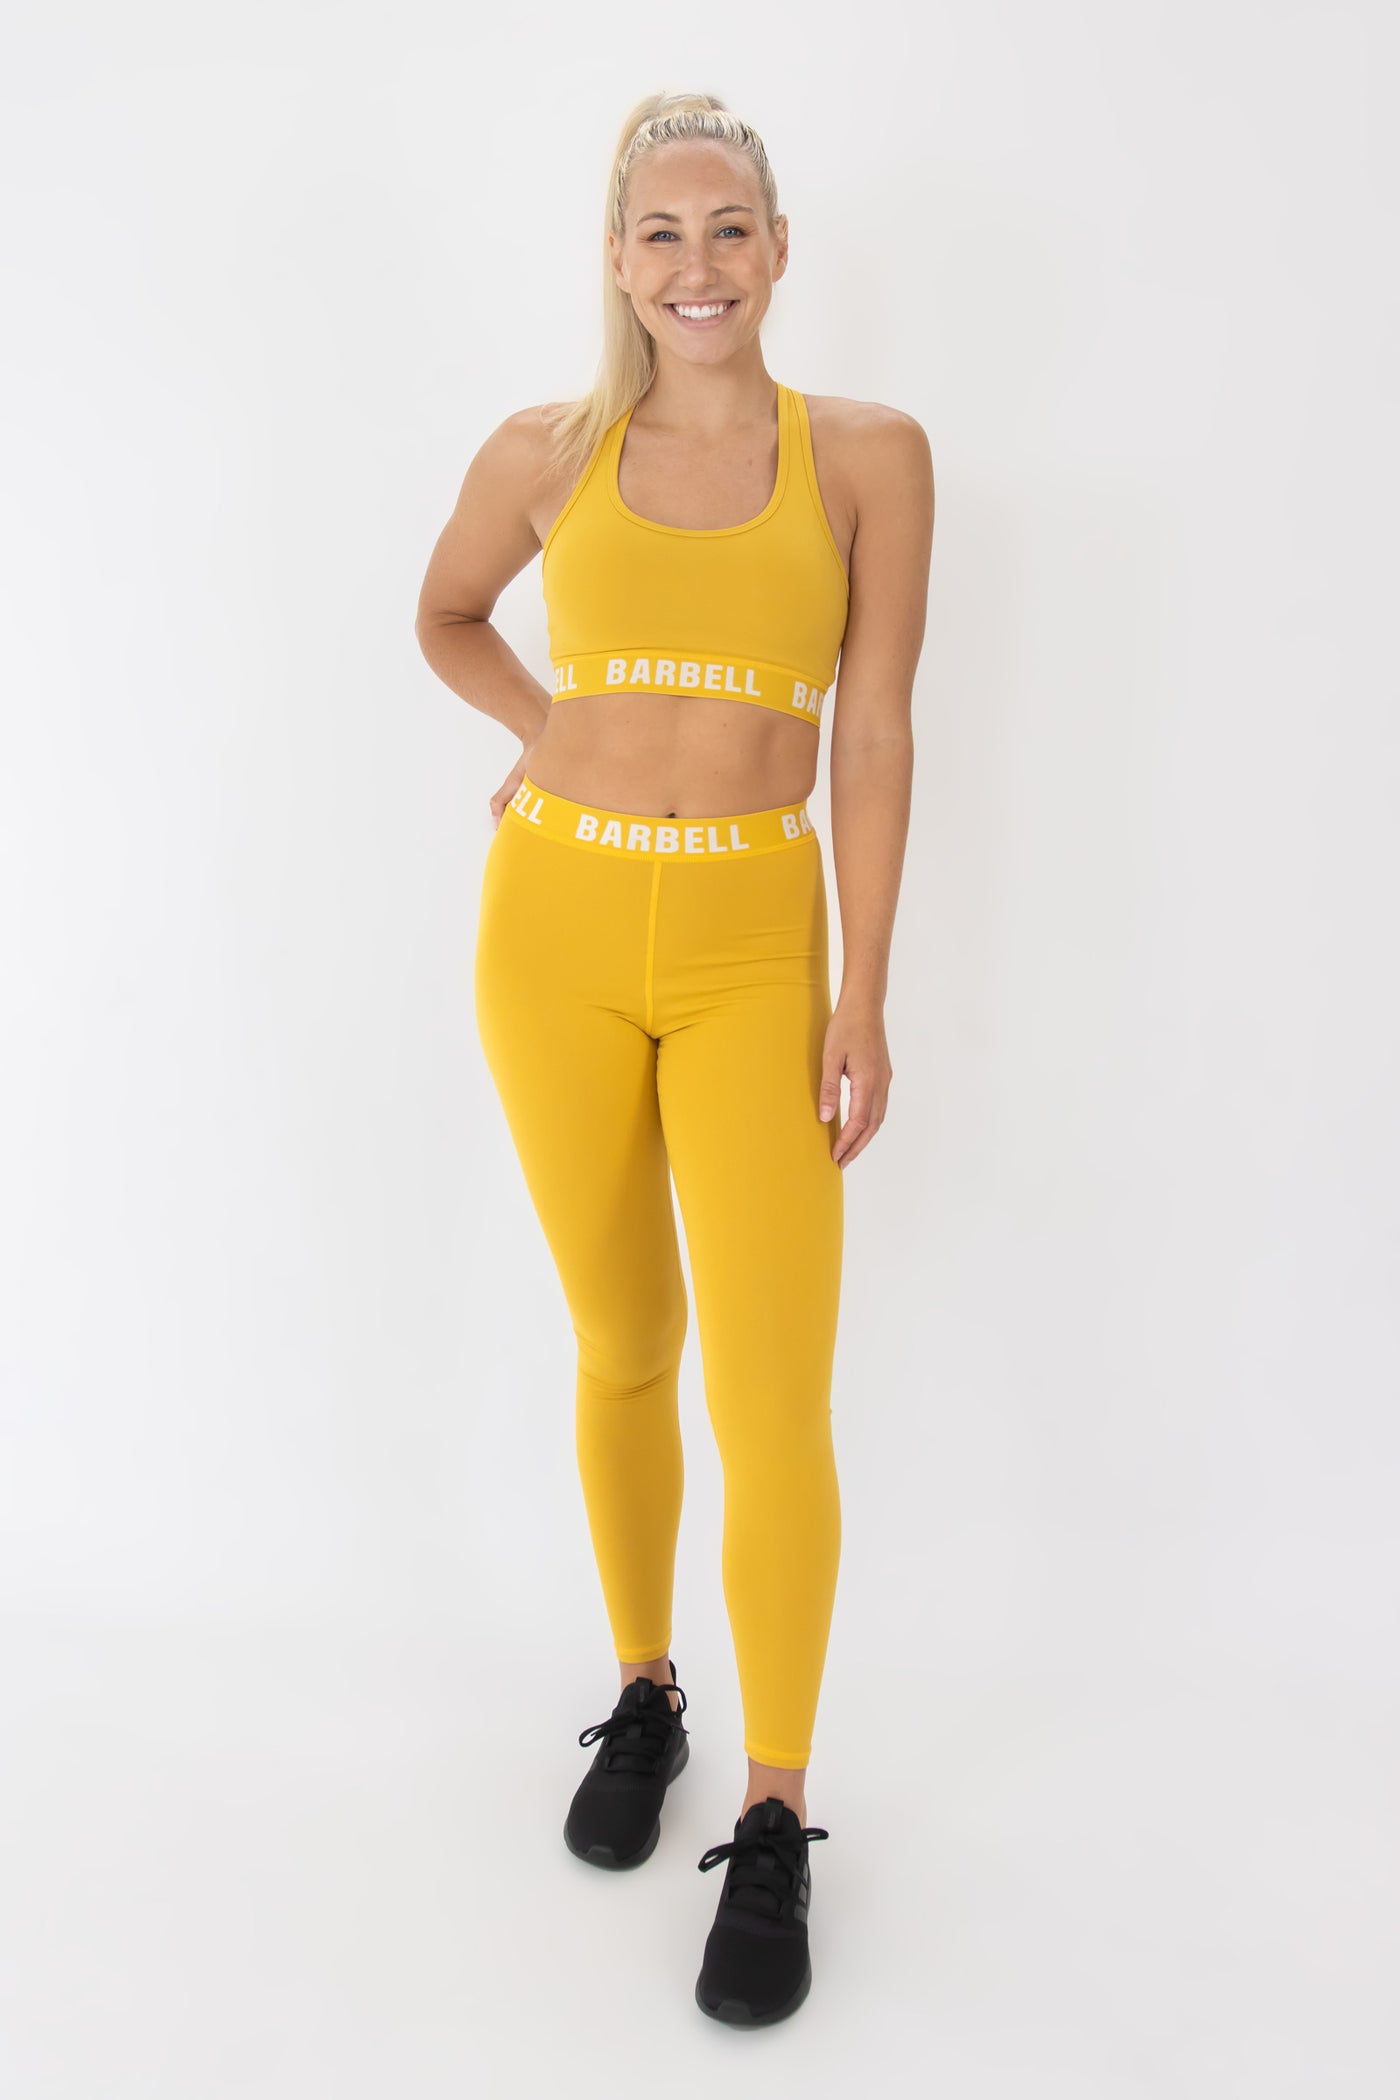 Barbell Barbell Leggings-daffodil - photo from front #color_daffodil